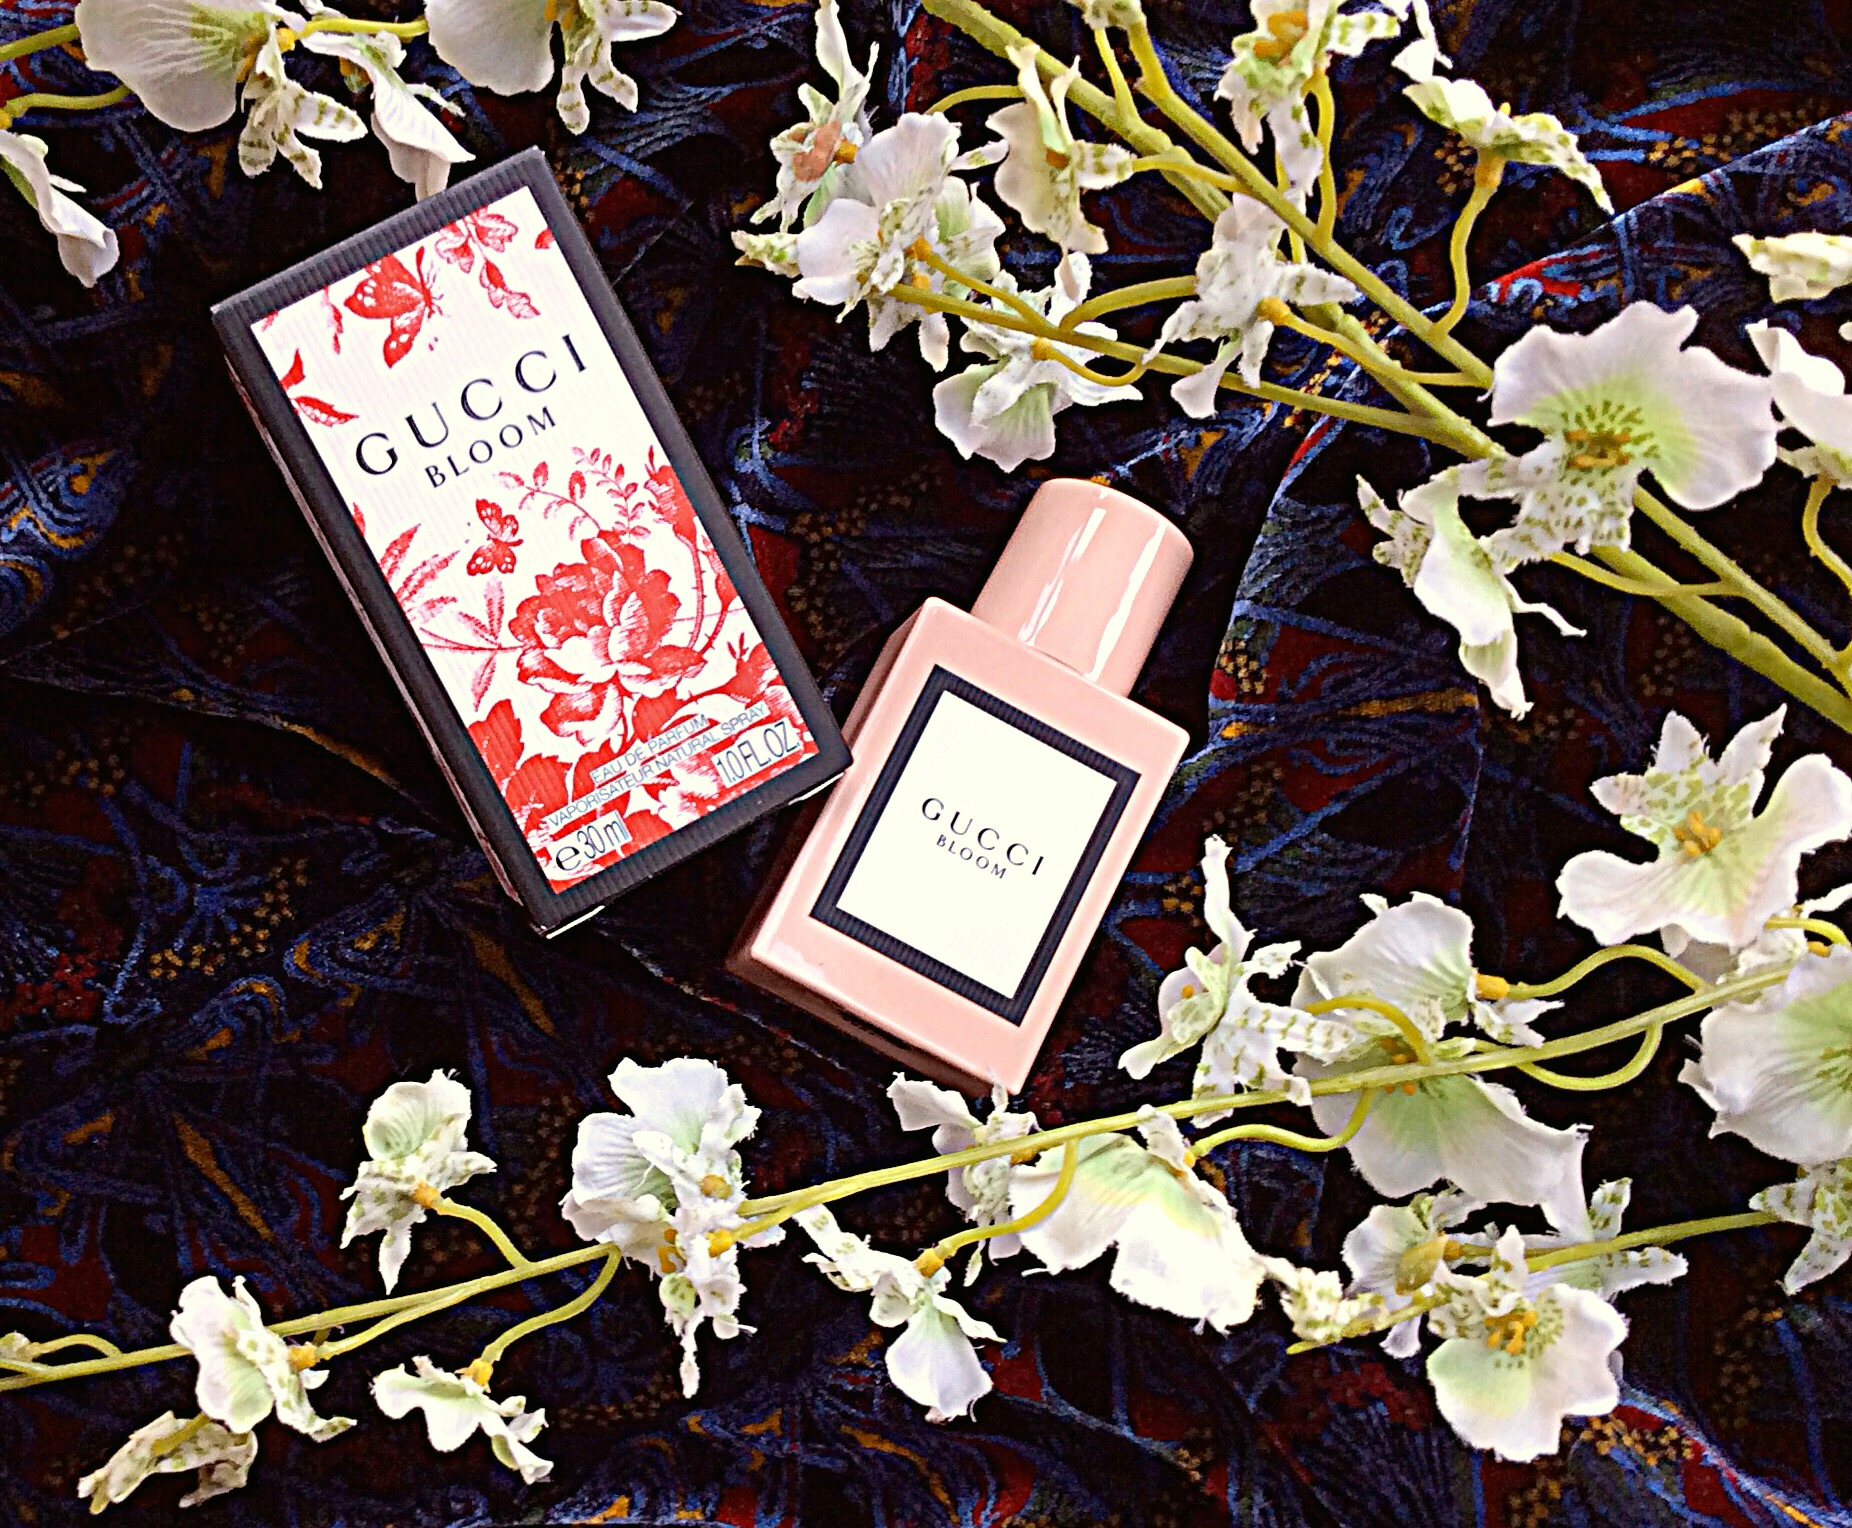 gucci floral bloom perfume